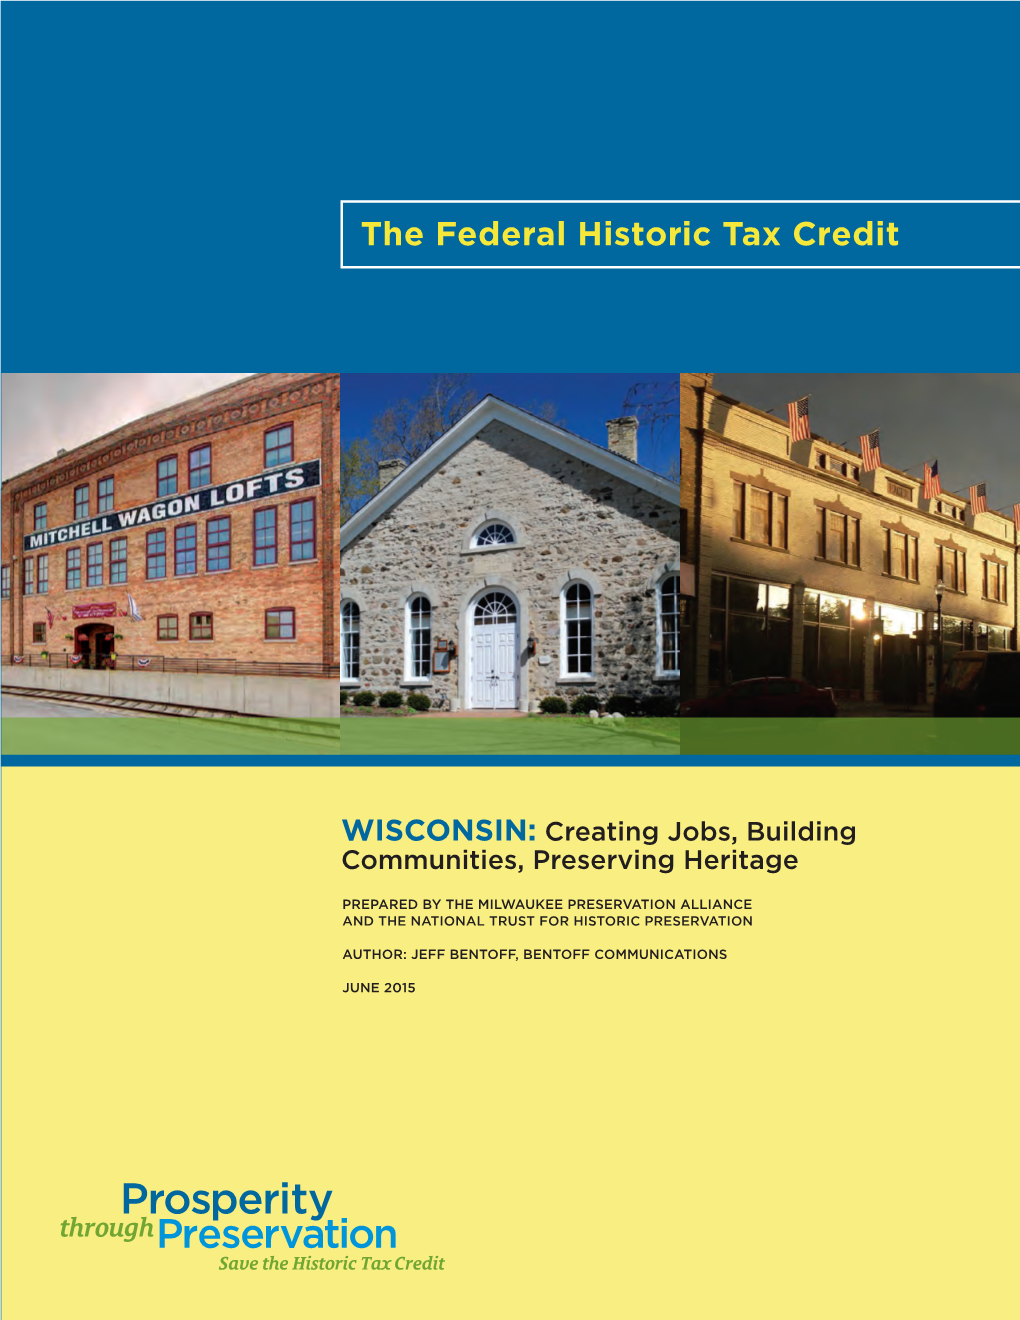 The Federal Historic Tax Credit